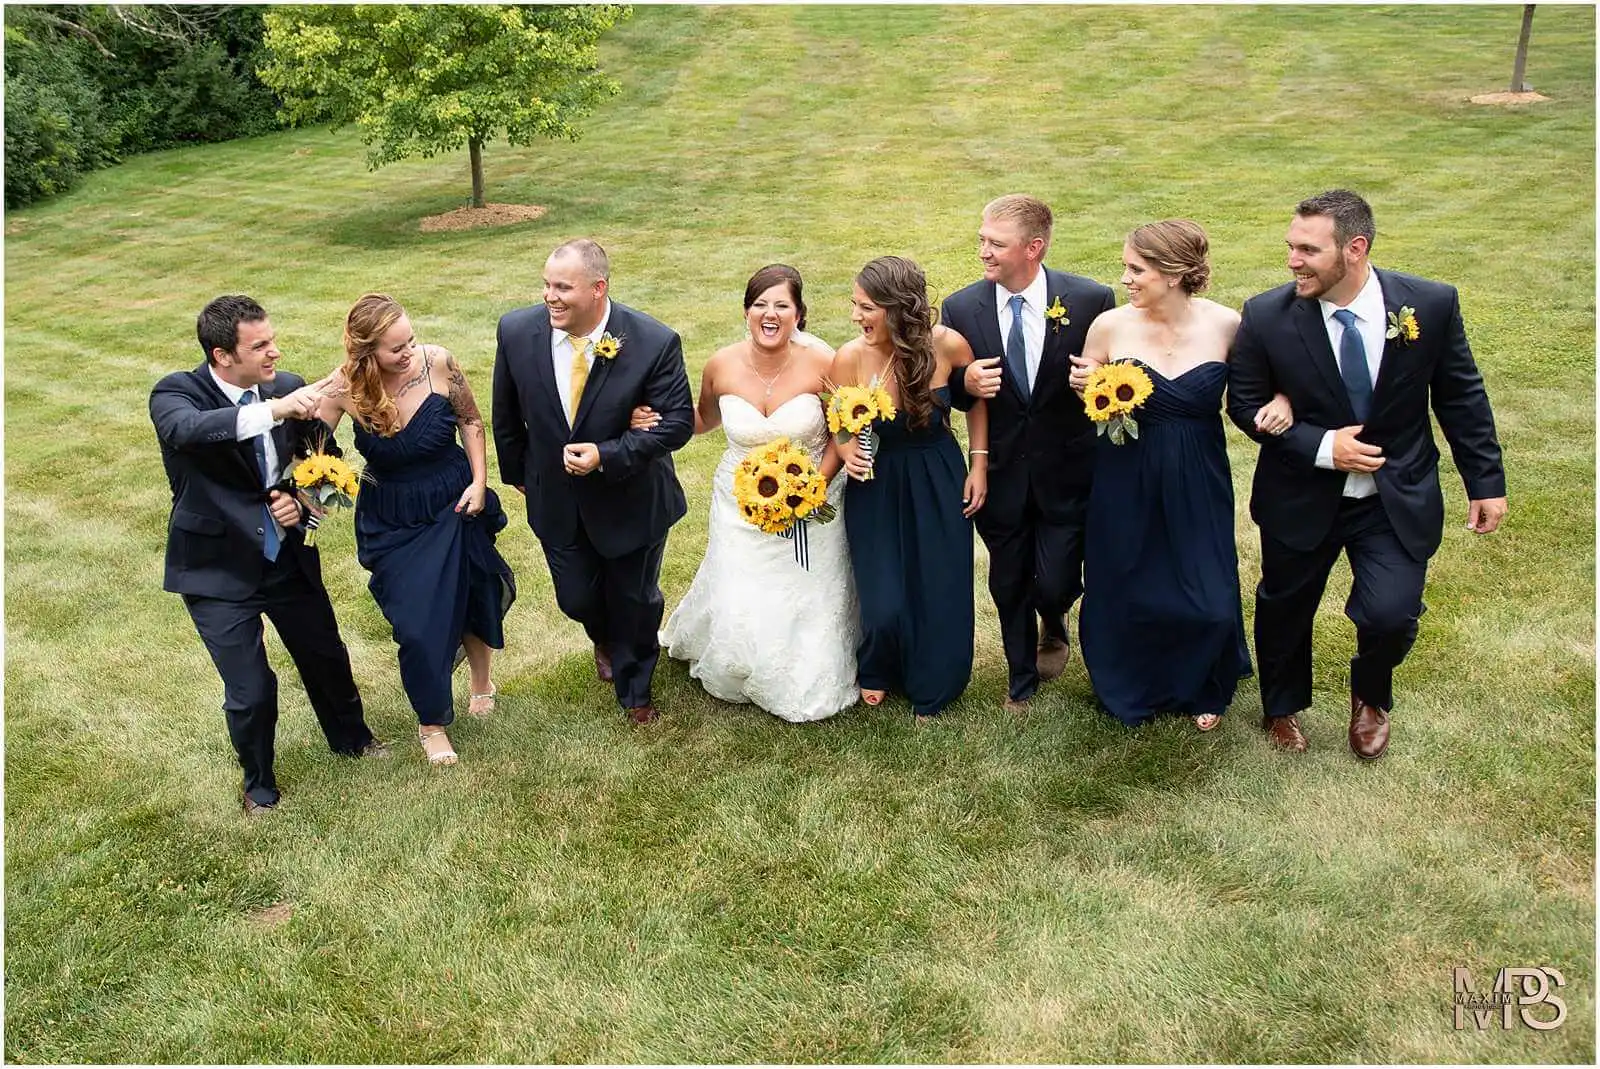 Normandy Church Dayton Ohio wedding bridal party pictures